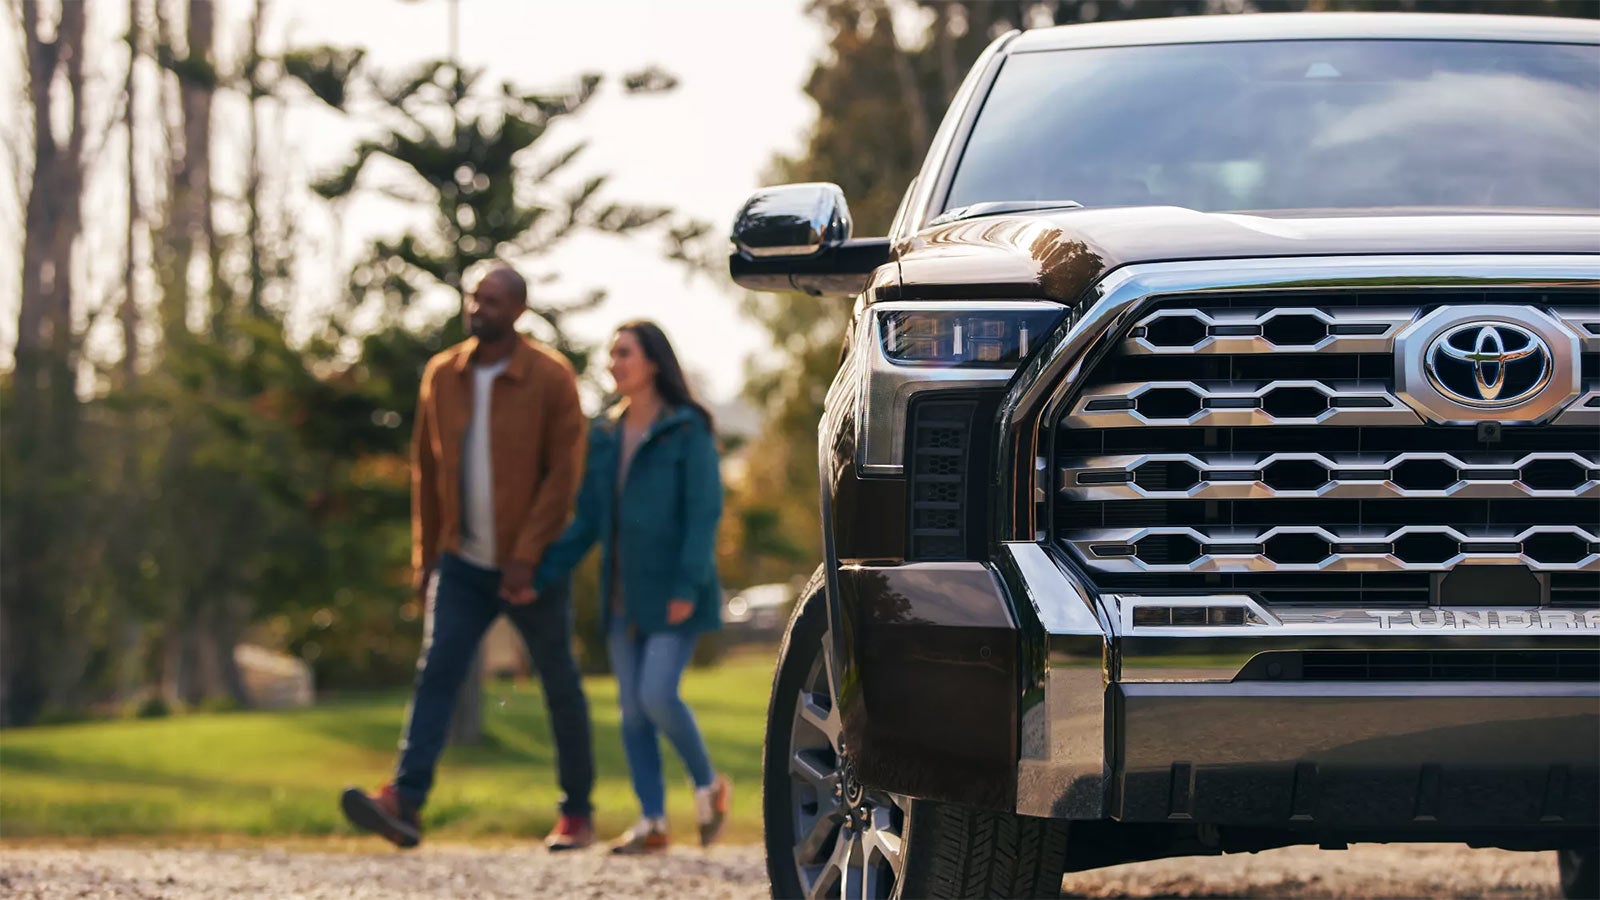 2022 Toyota Tundra Gallery | Westchester Toyota in Yonkers NY